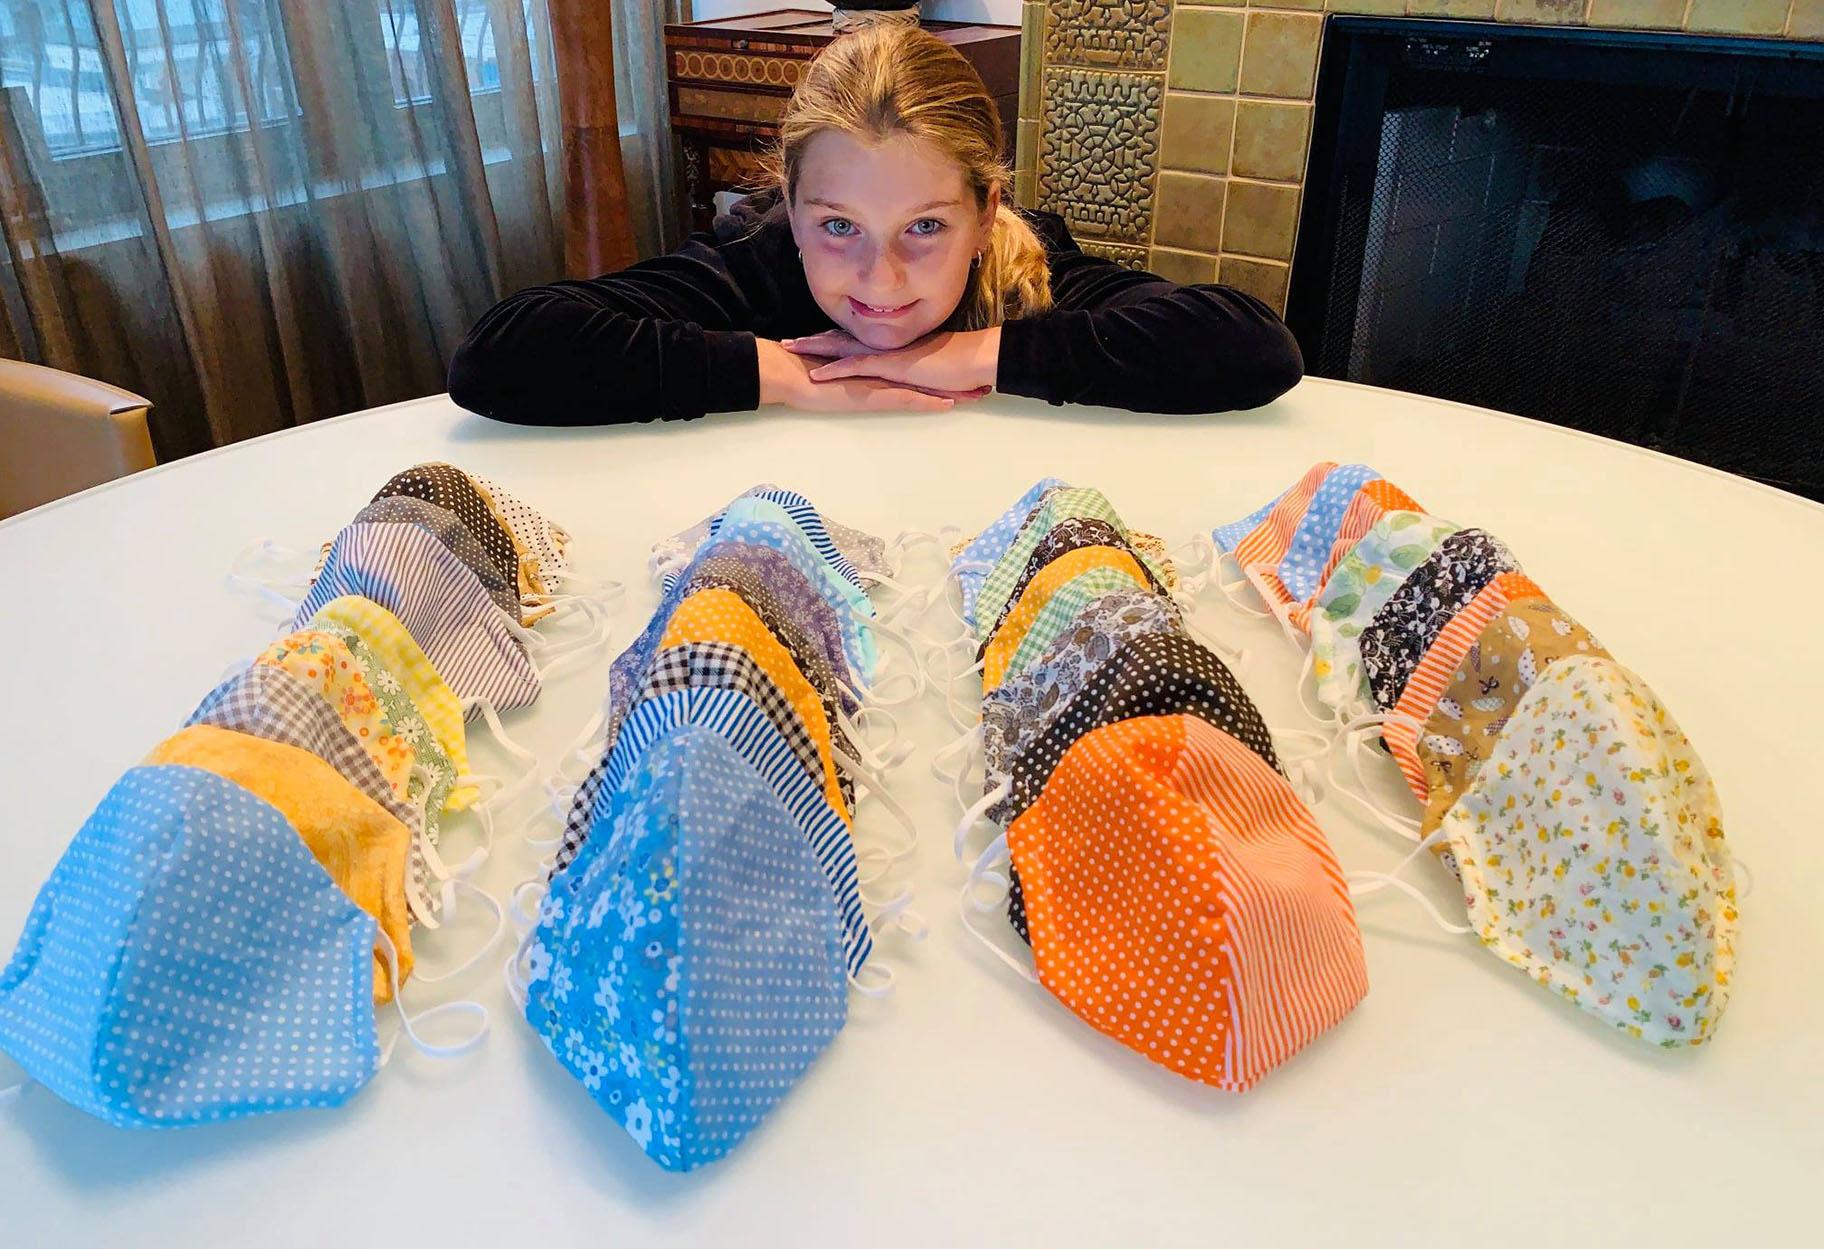 Alexia Brockmann, 12, has made hundreds of masks during the pandemic. (Photo: Kerry Fitzpatrick)